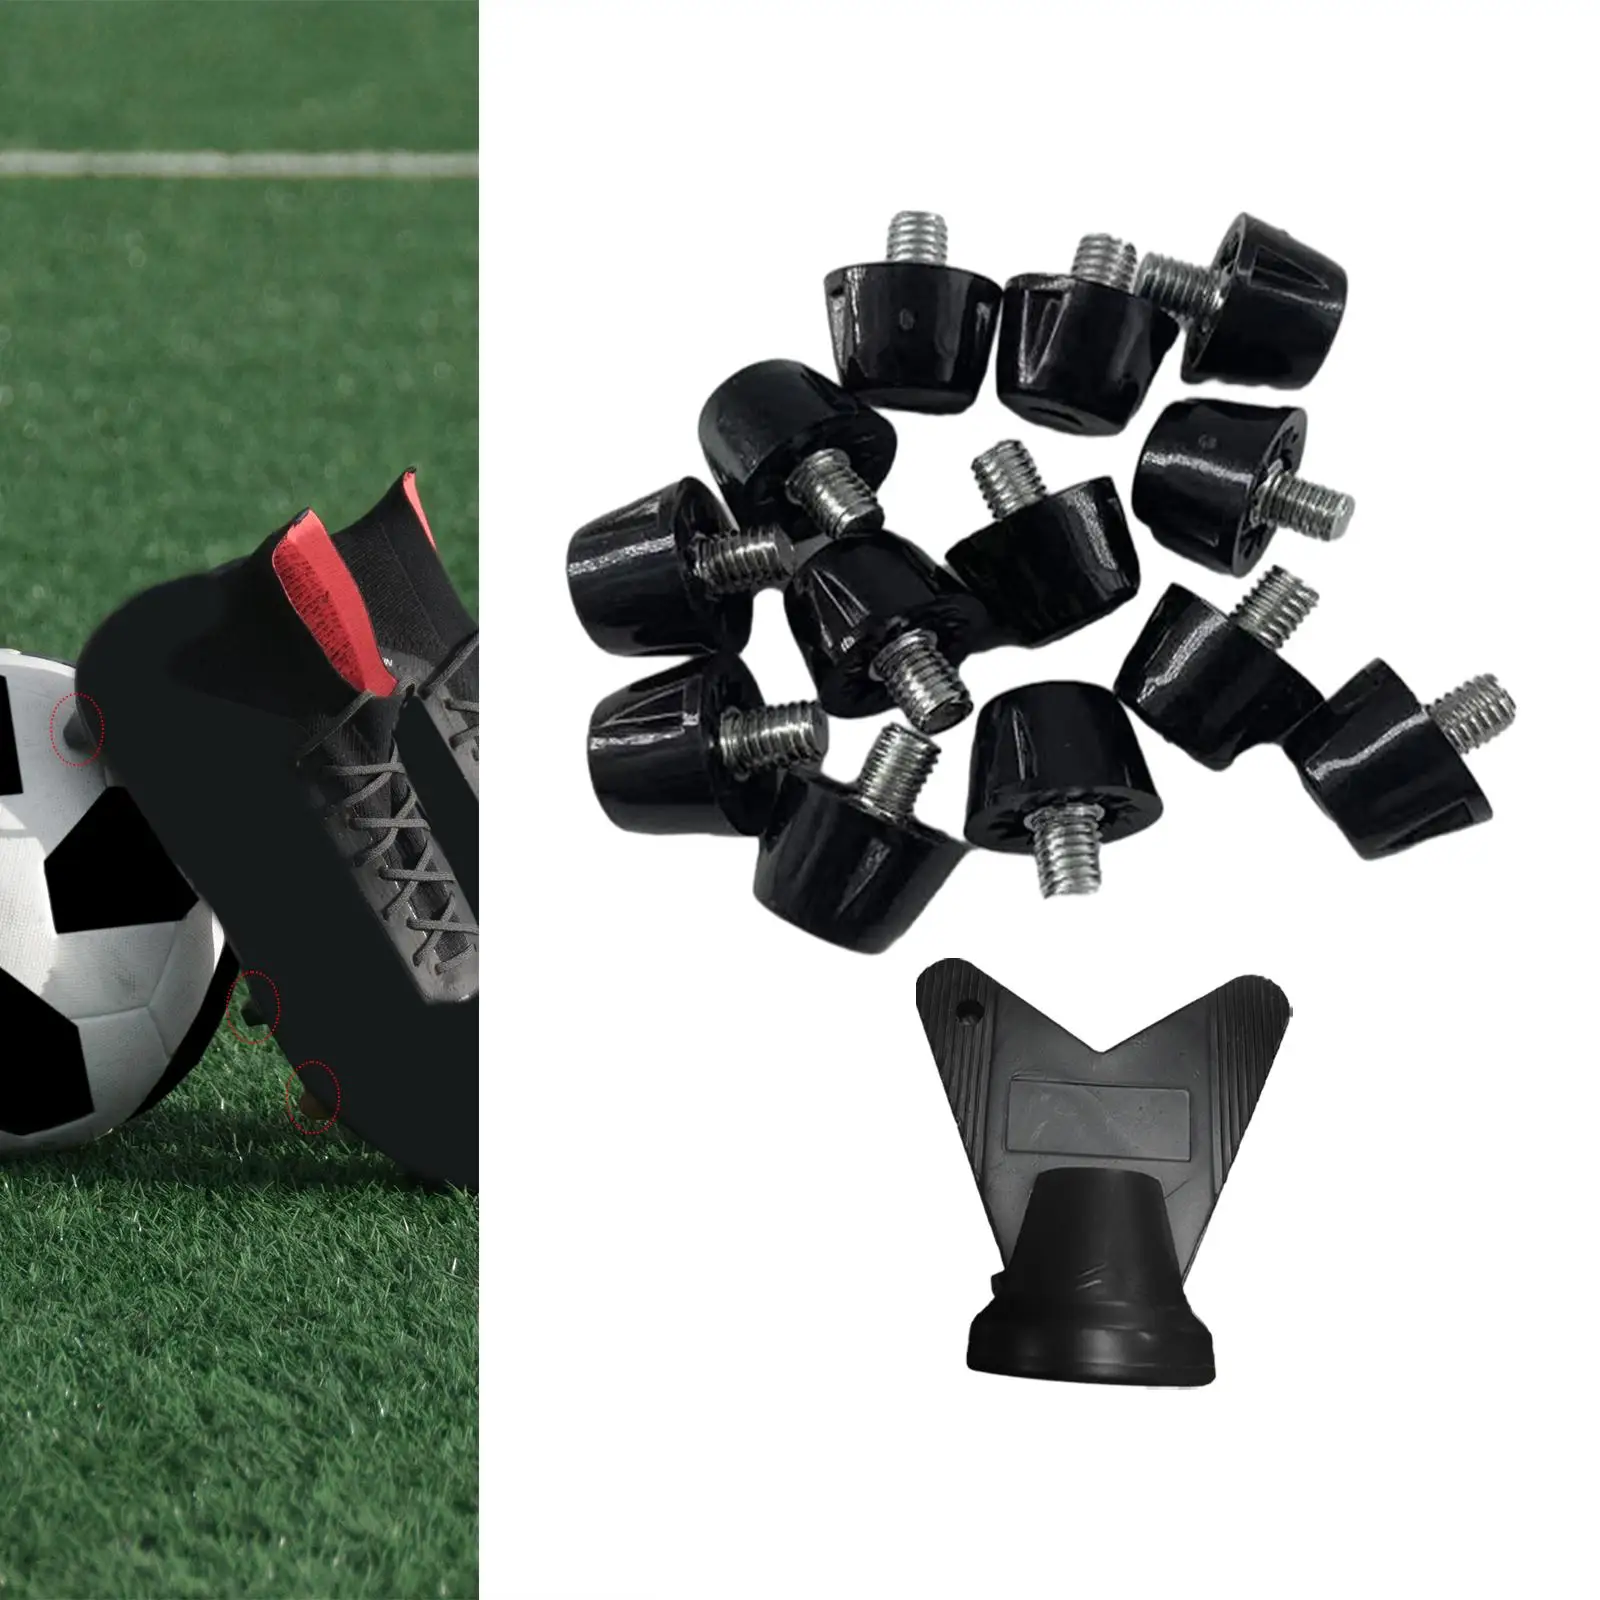 12x Football Boot Spikes Thread Screw 5mm Dia Durable Turf Soccer Boot Cleats Replacement Football Studs Track Shoe Accessories